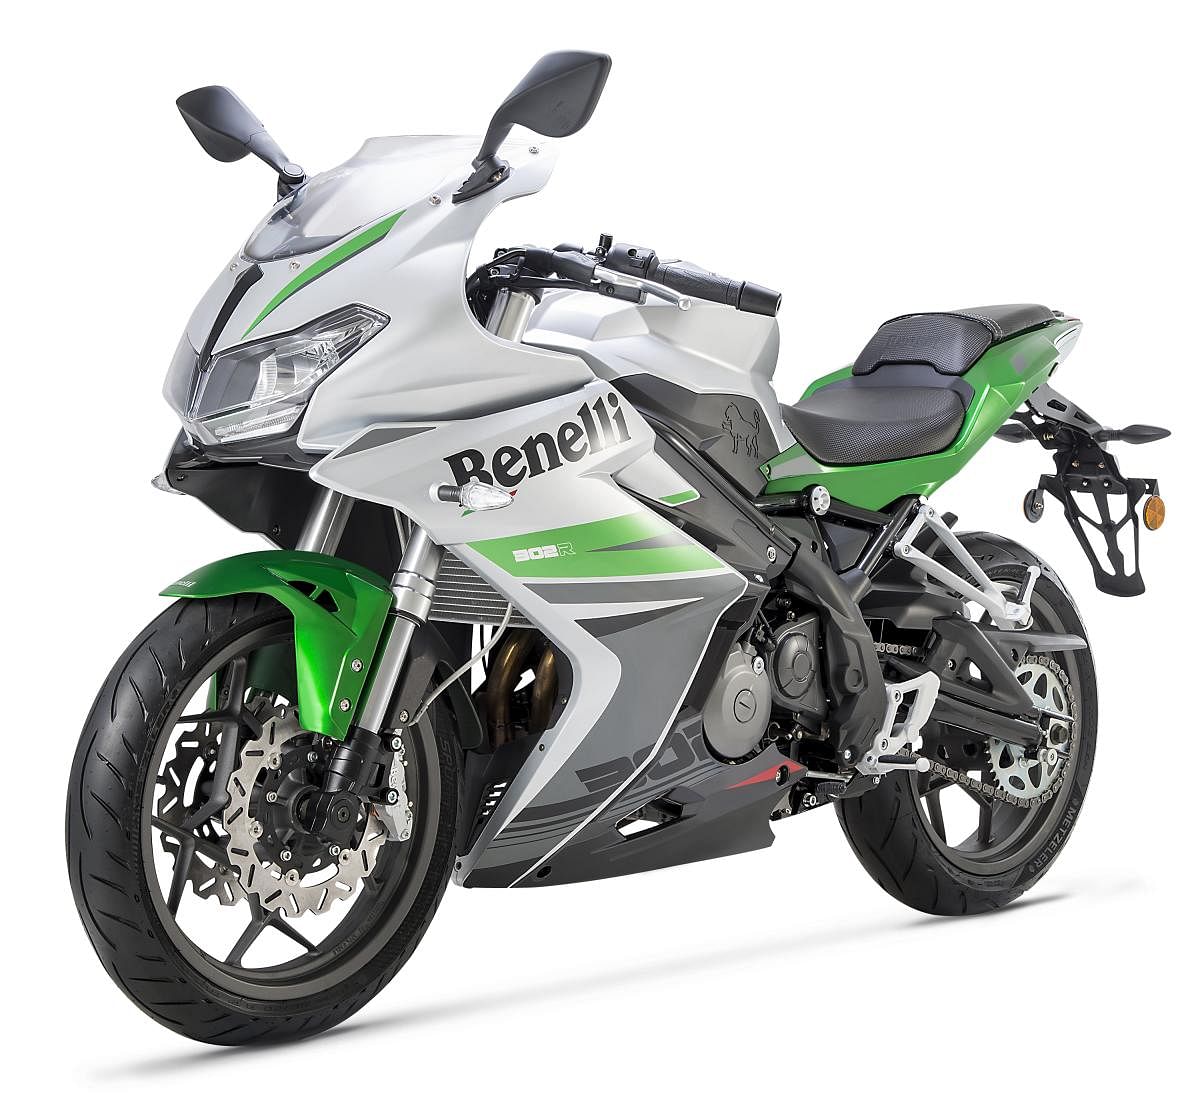 Benelli bikes to be cheaper as prices slashed